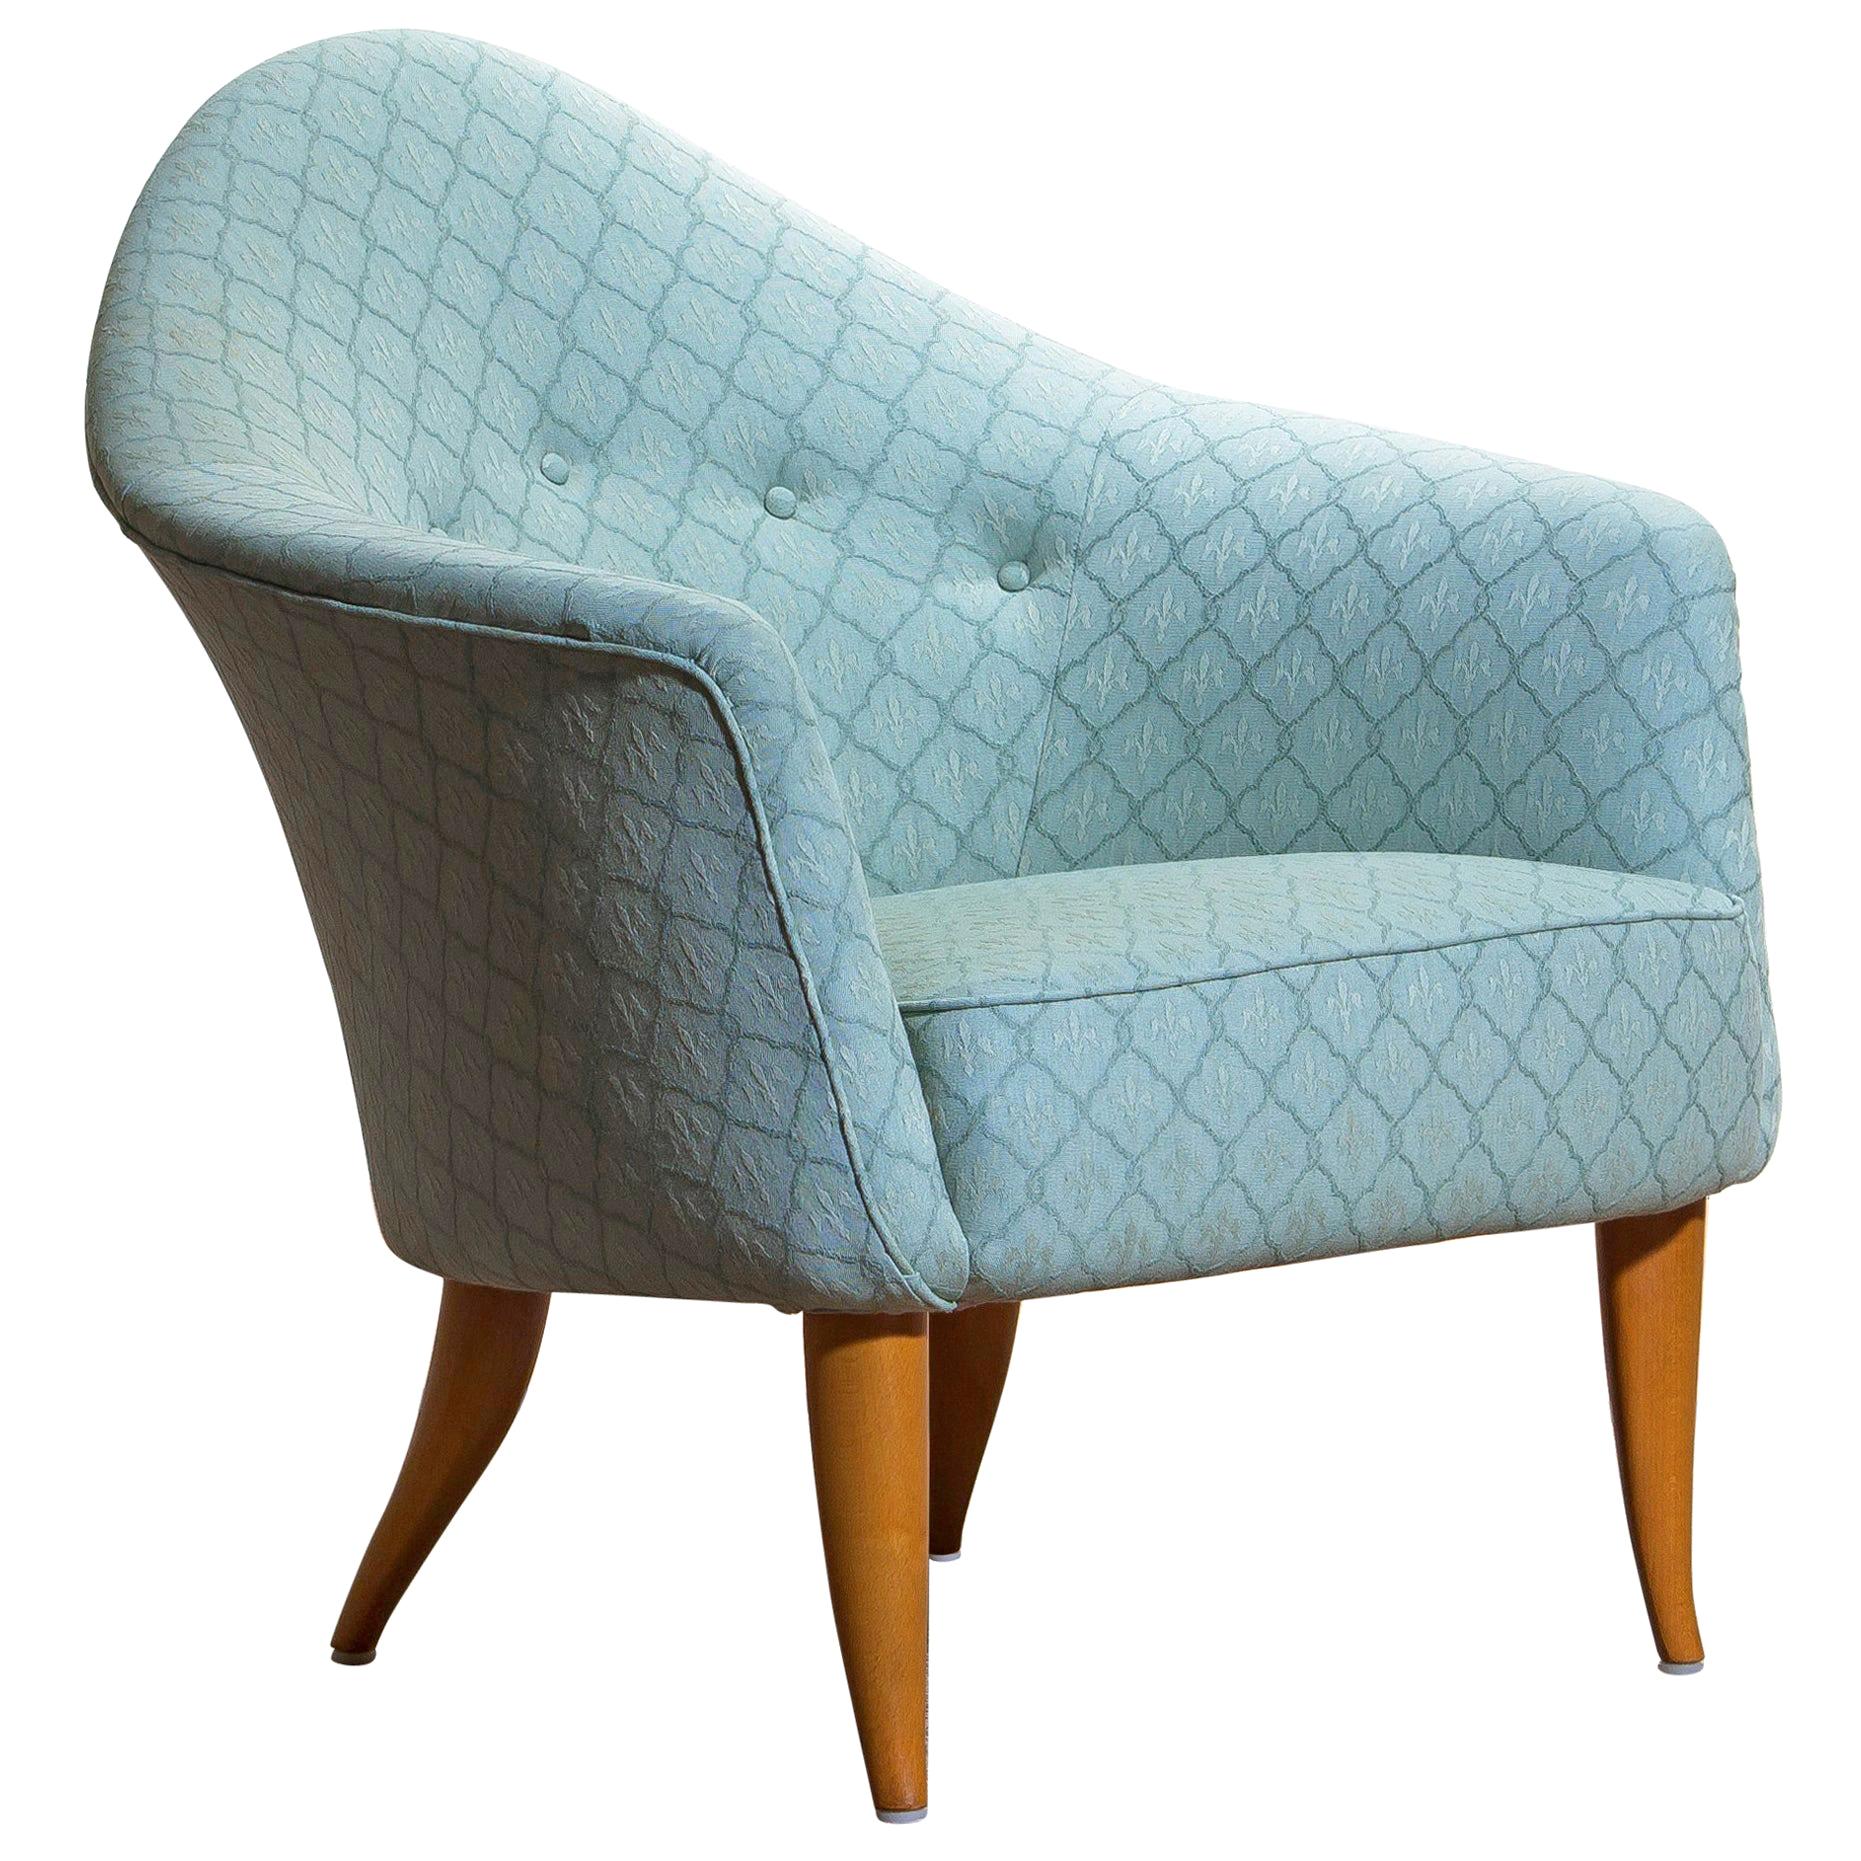 1950s beautiful ‘Little Adam’ lounge / easy chair designed by Kestin Hörlin-Holmquist for the ‘Paradiset’ collection and manufactured by Nordiska Kompaniet.
The chair is upholstered in a Jacquard fabric and in good condition.
Designed in 1958 for